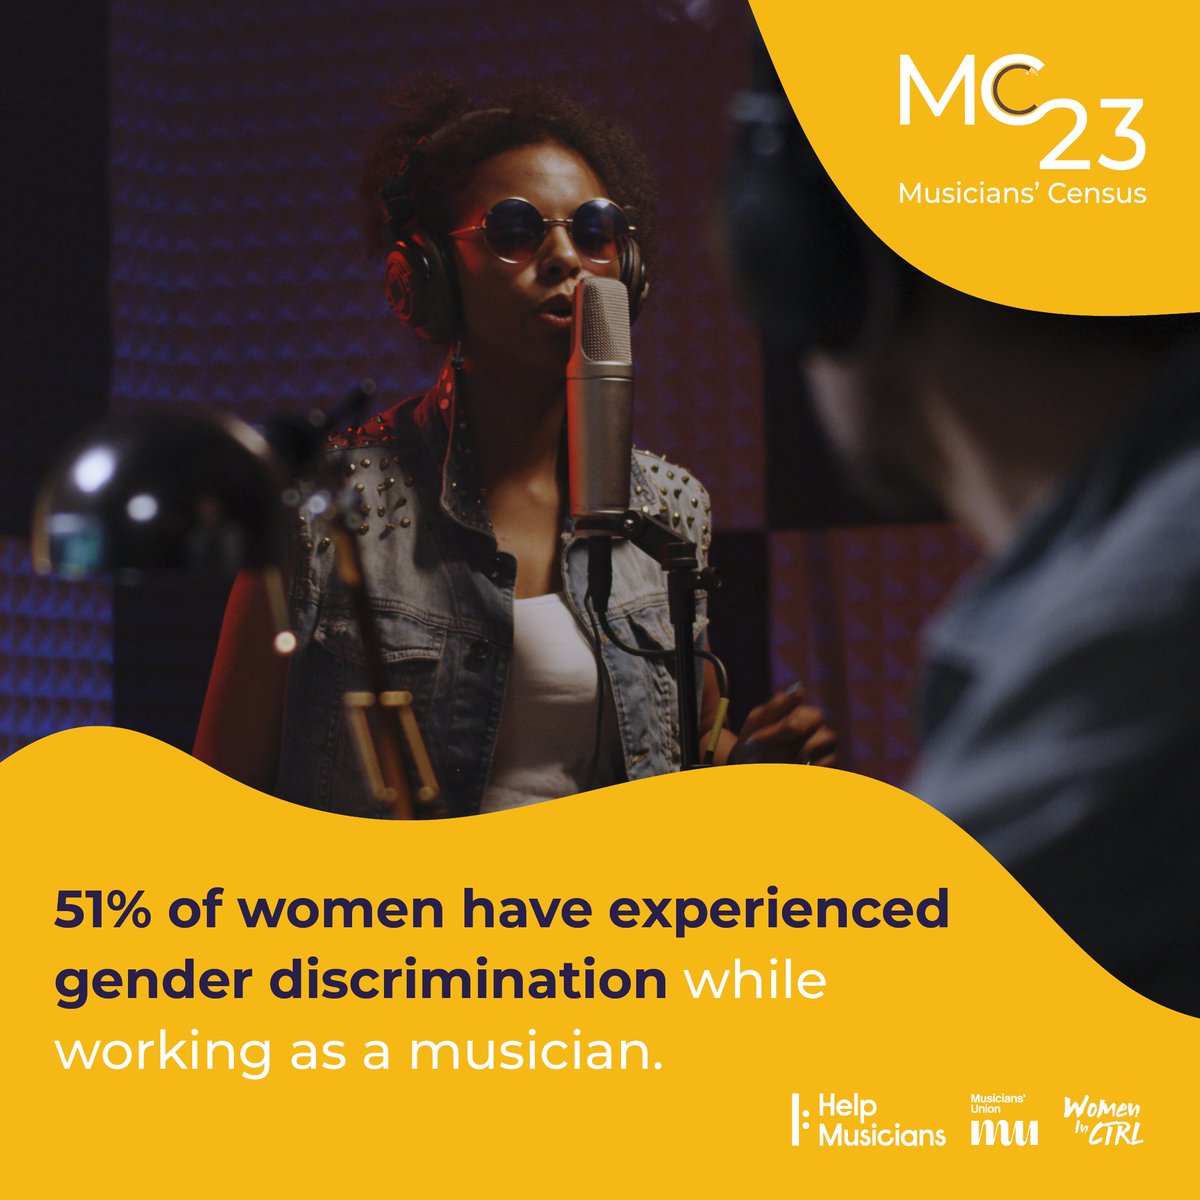 🚨 51% of women in music have been discriminated against due to their gender, according to the latest Musicians' Census report